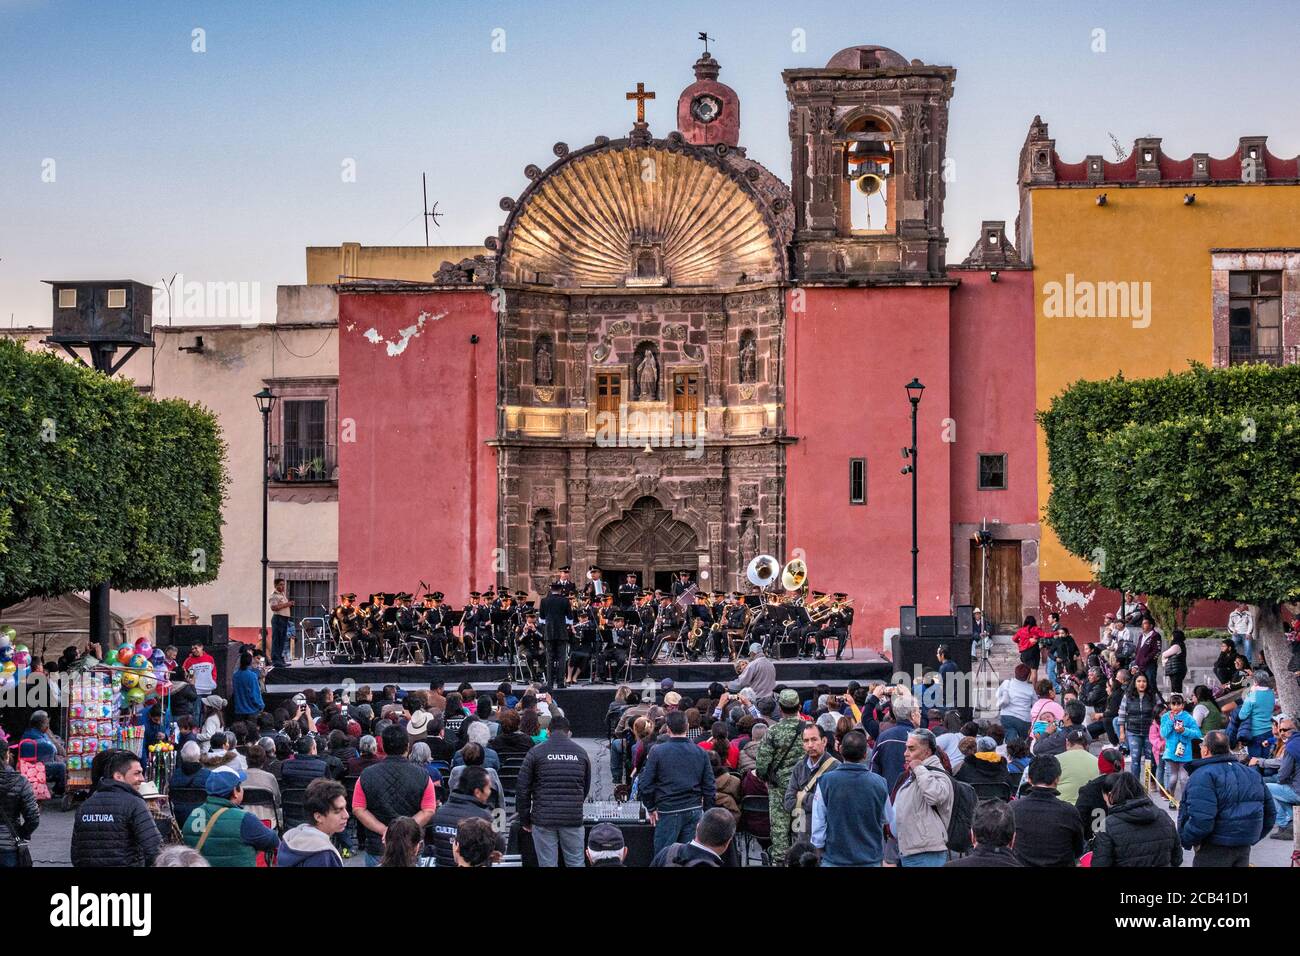 A city sponsored concert in the Plaza Civic in front of the Our Lady of Health church in the historic center of San Miguel de Allende, Guanajuato, Mexico. Stock Photo